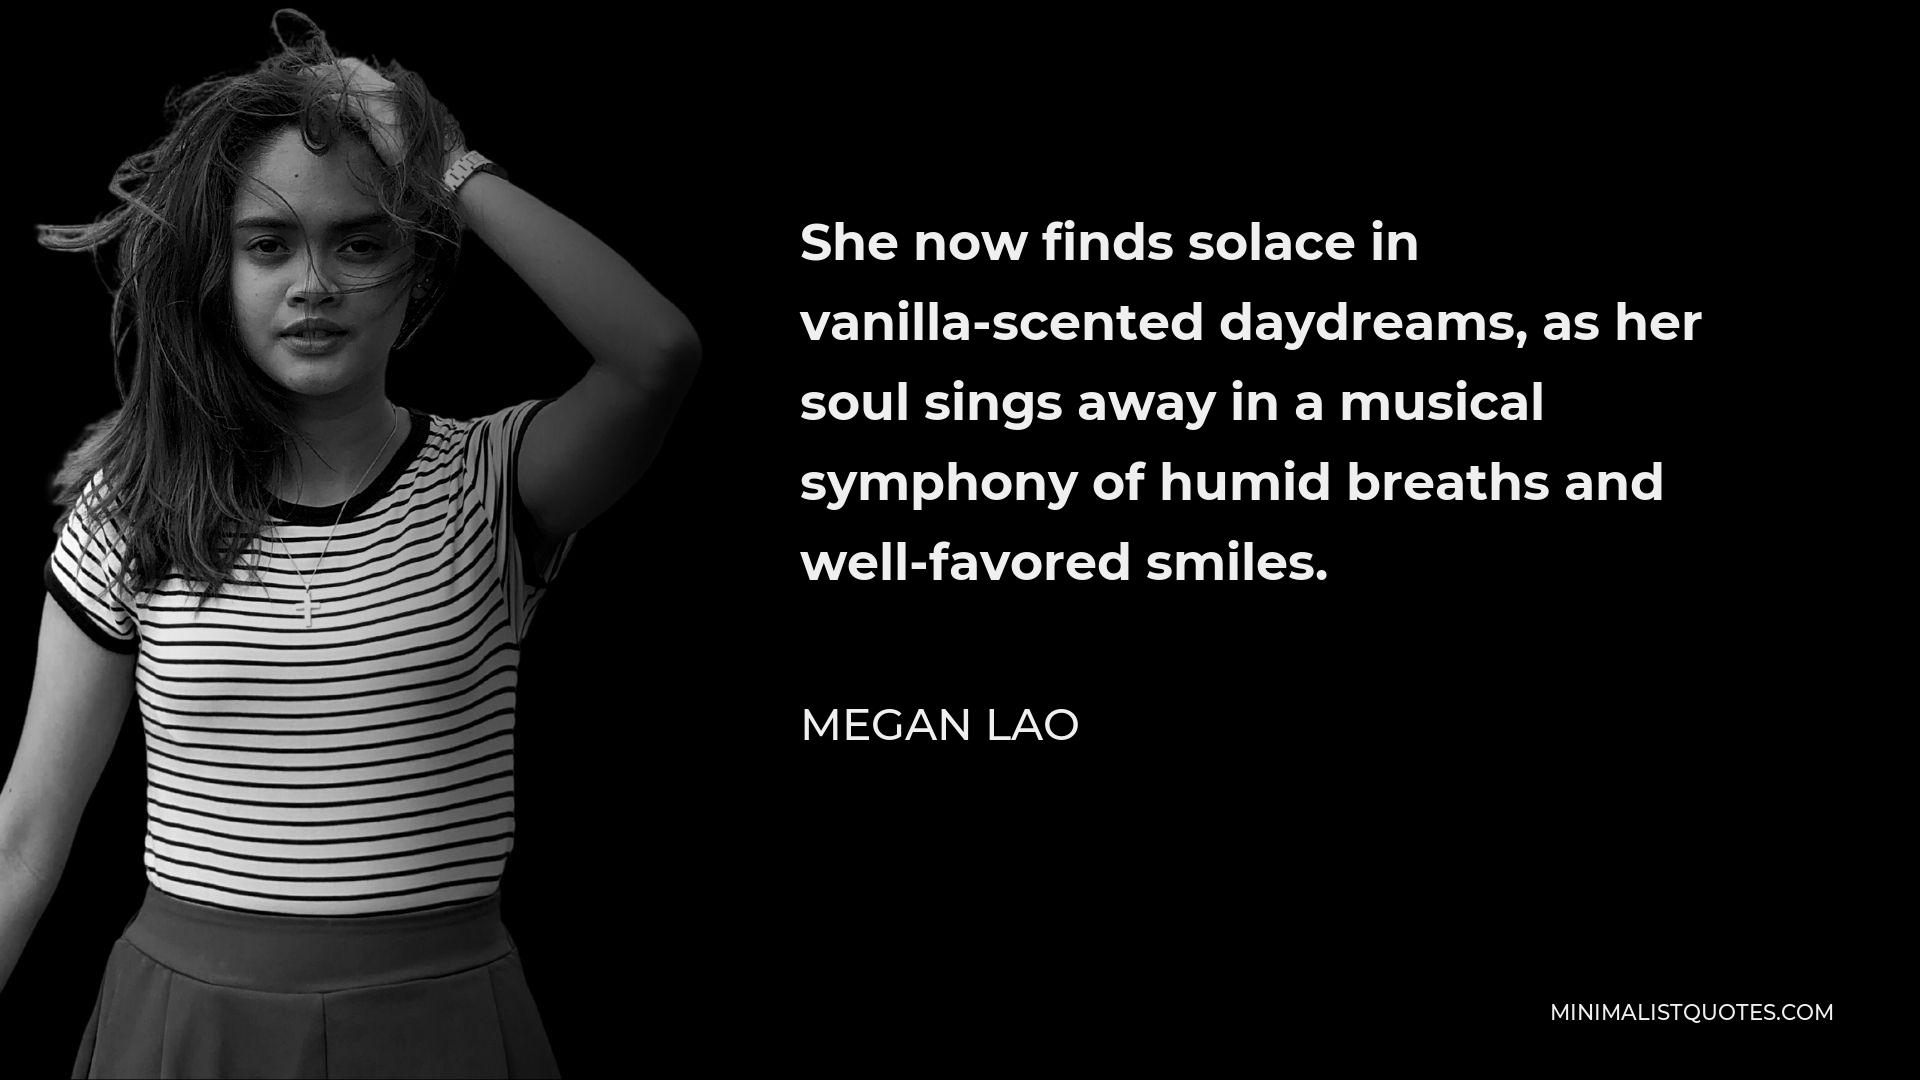 Megan Lao Quote - She now finds solace in vanilla-scented daydreams, as her soul sings away in a musical symphony of humid breaths and well-favored smiles.